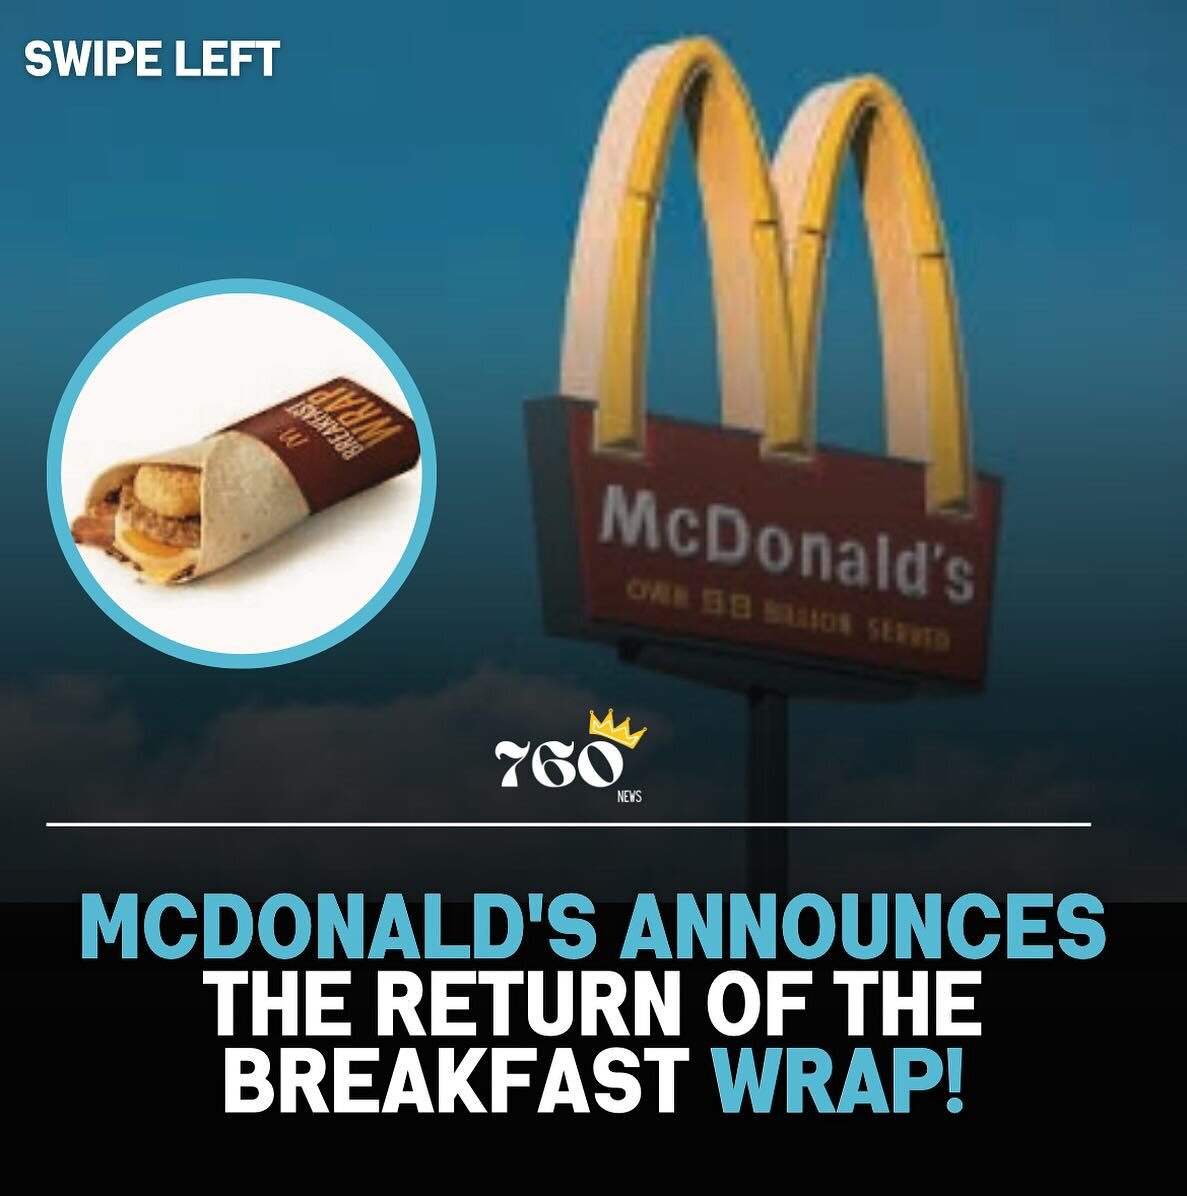 #McDonald's announces the return of the breakfast wrap available on February 7, 2023!